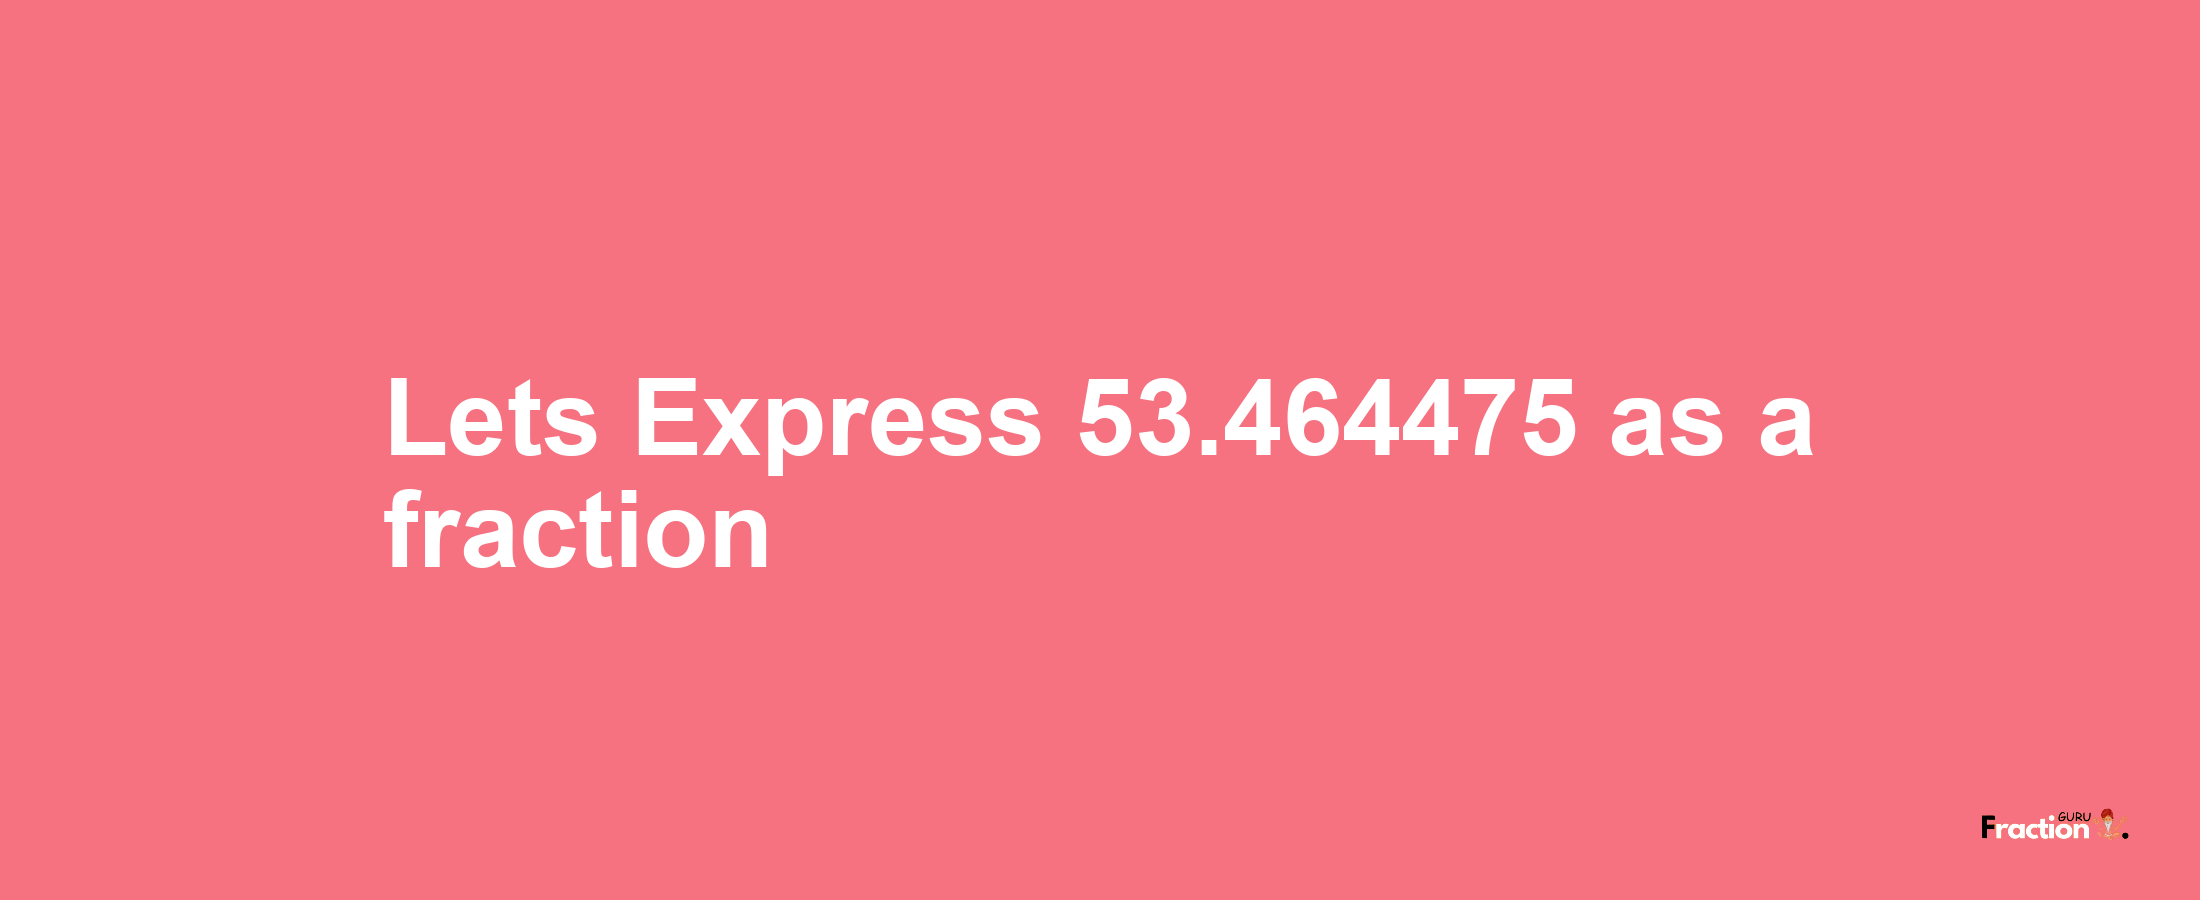 Lets Express 53.464475 as afraction